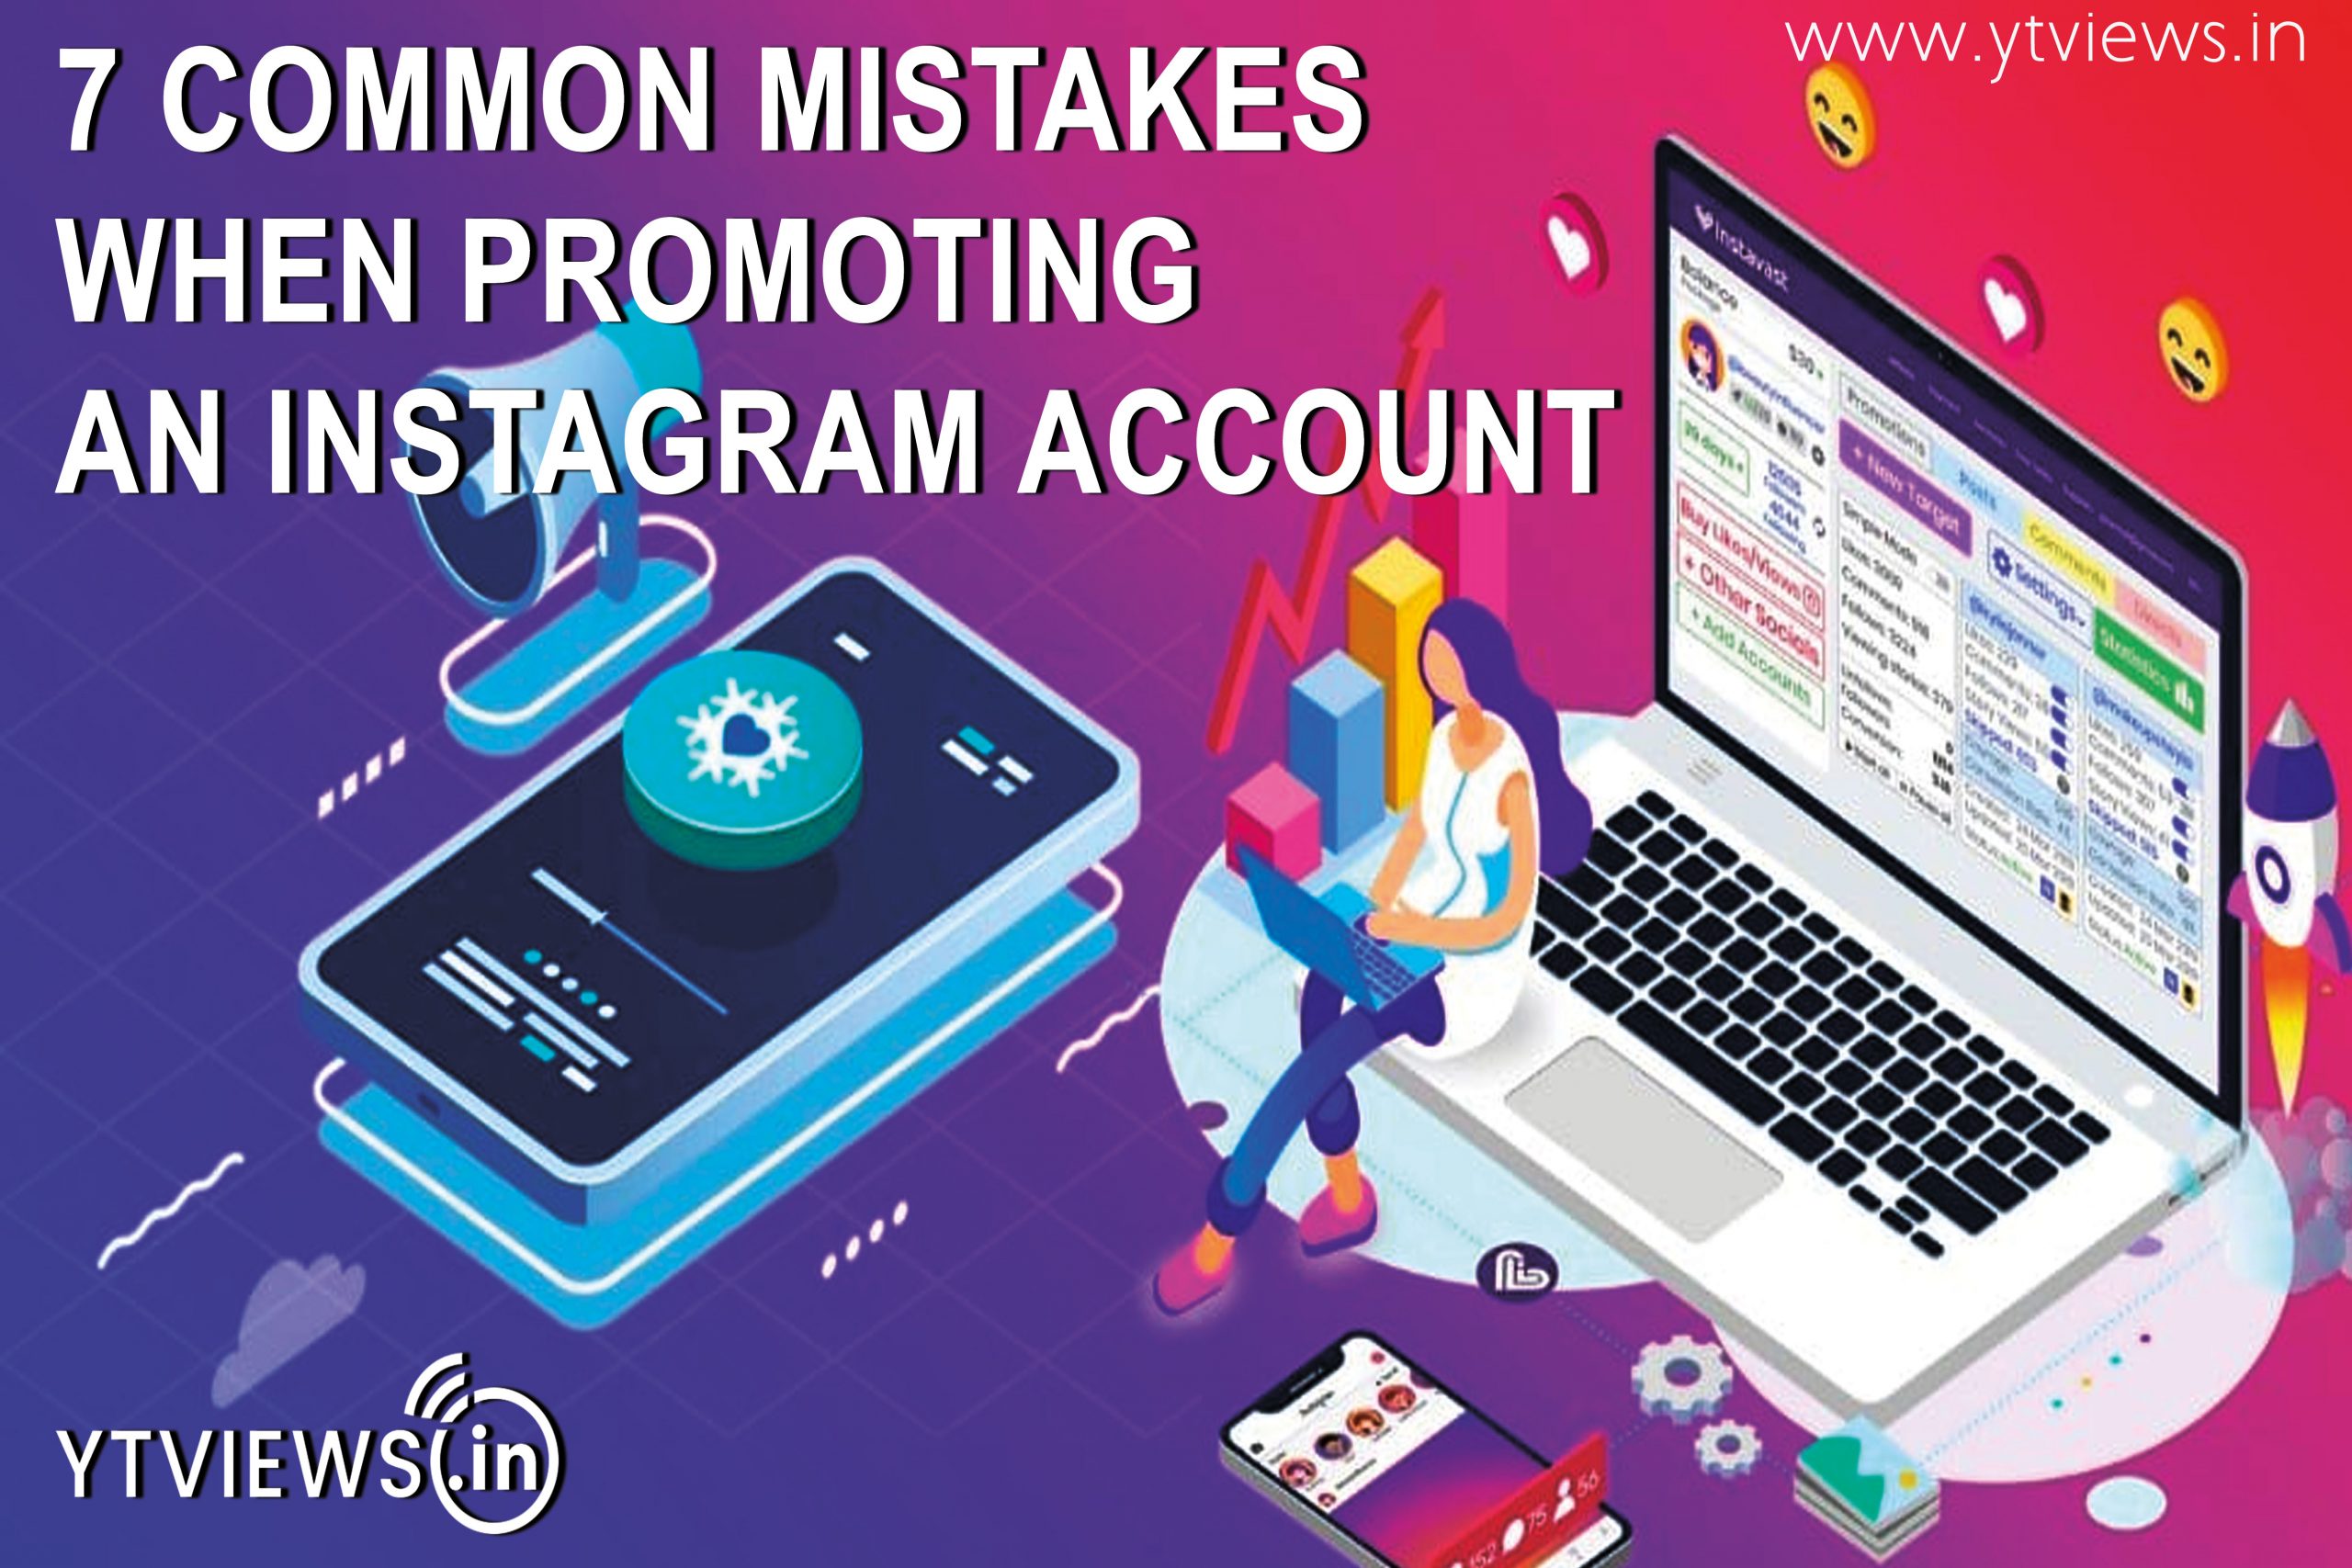 7 common mistakes when promoting an Instagram account